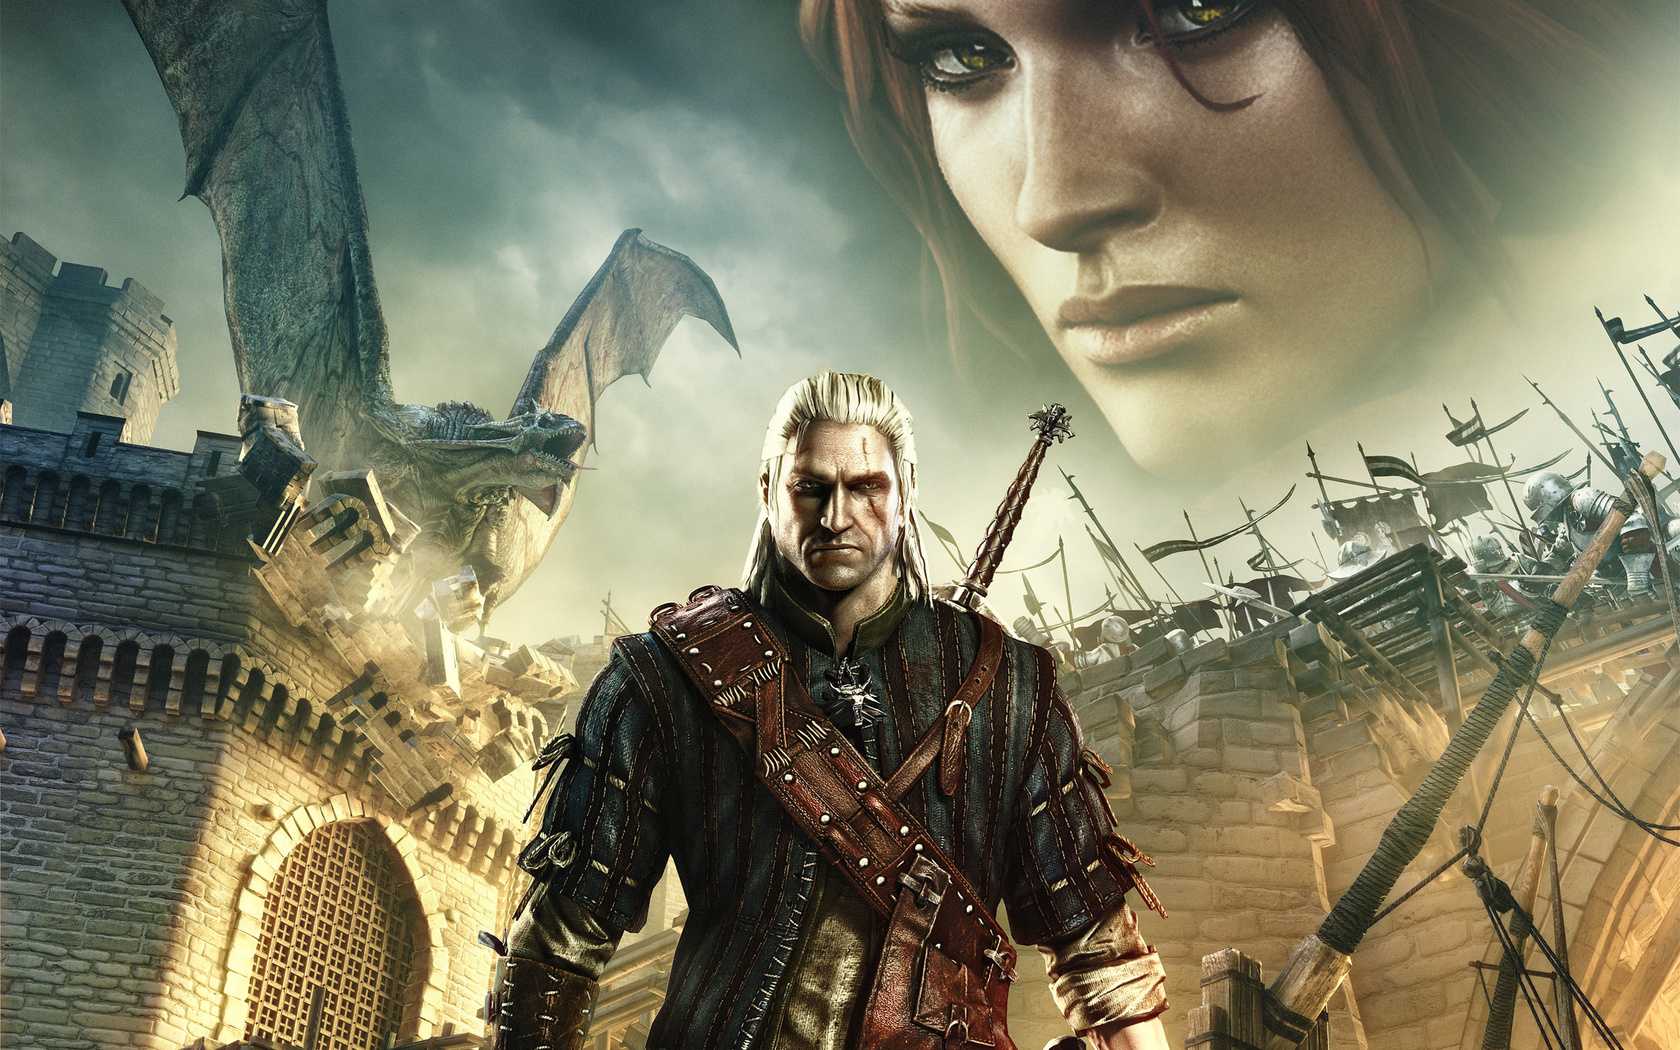 The witcher 2: assassins of kings - pcgamingwiki pcgw - bugs, fixes, crashes, mods, guides and improvements for every pc game